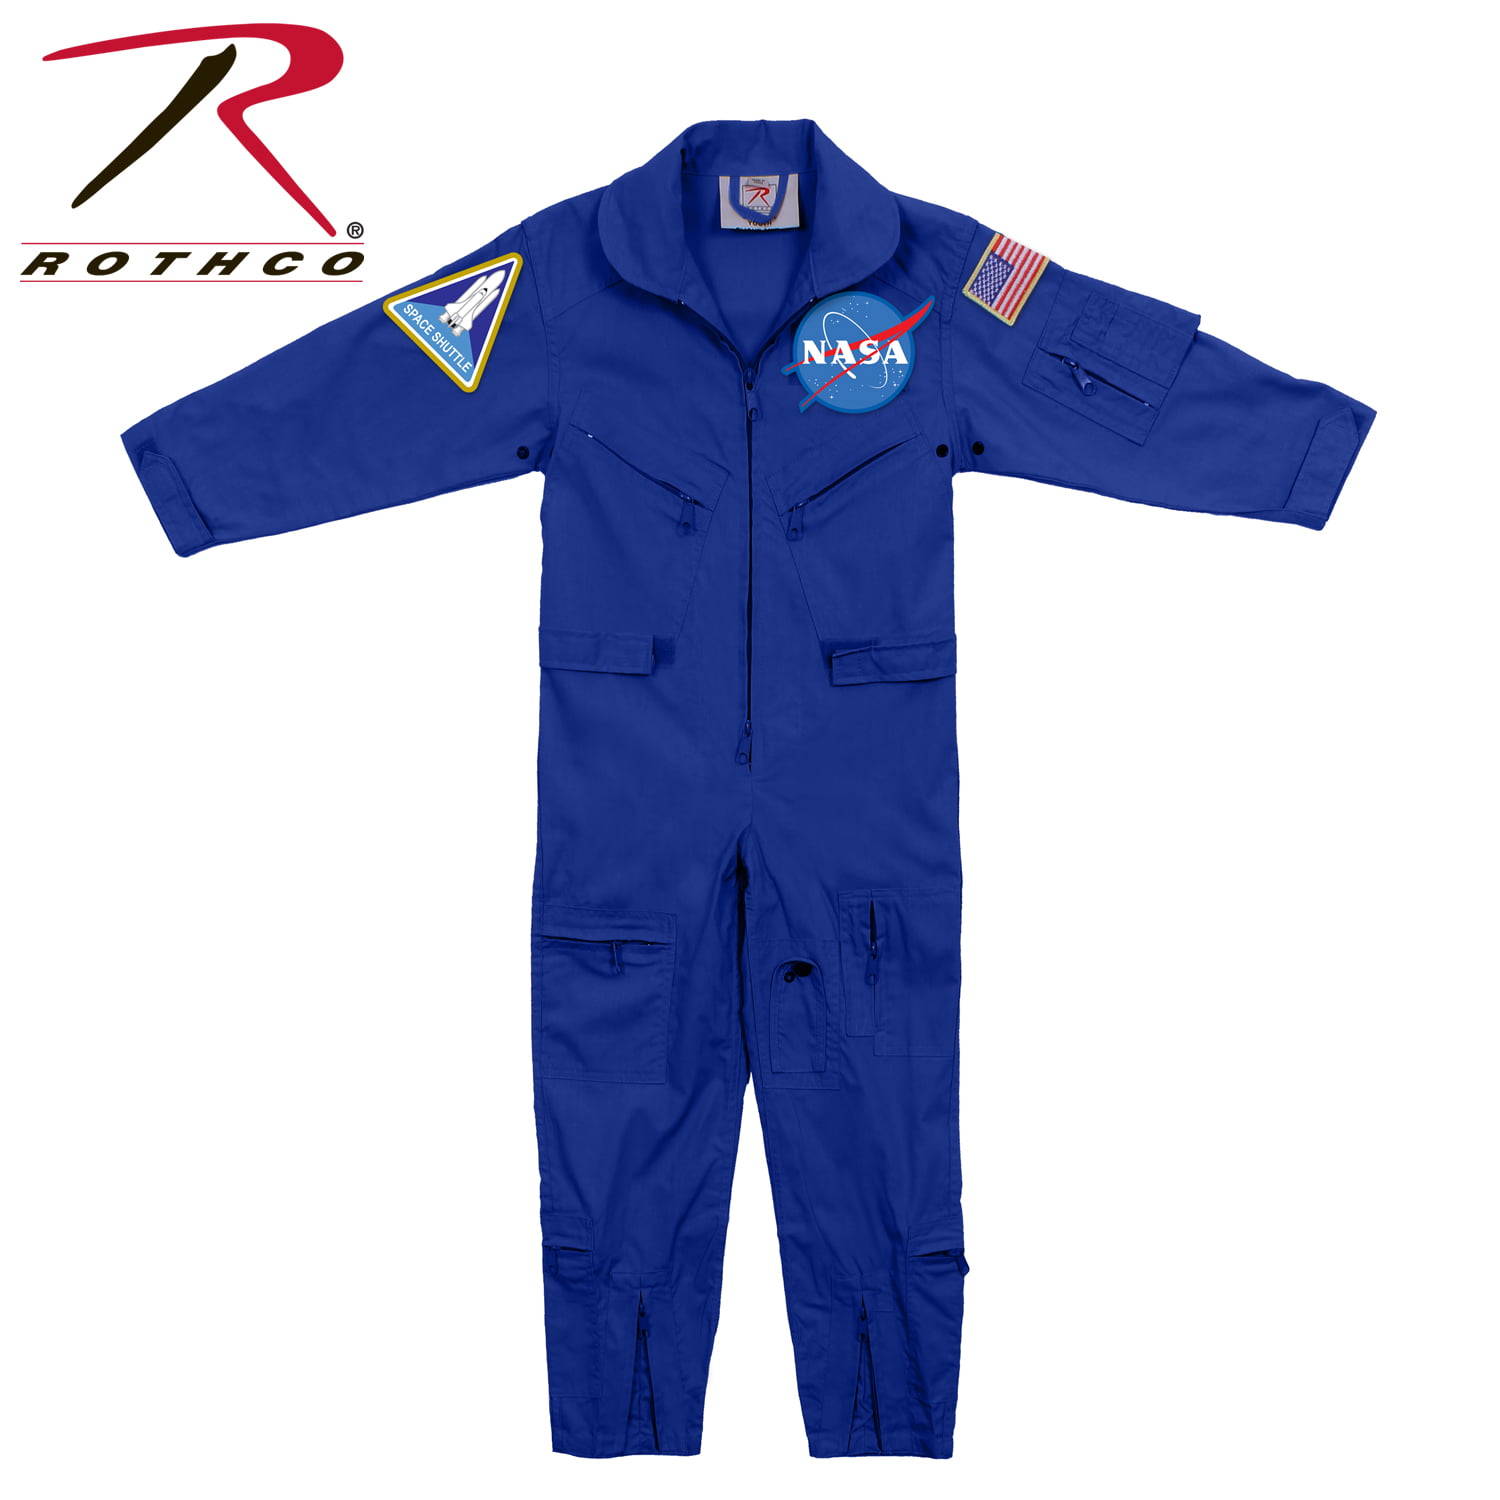 Nasa Cotton Fabric Patches on Blue